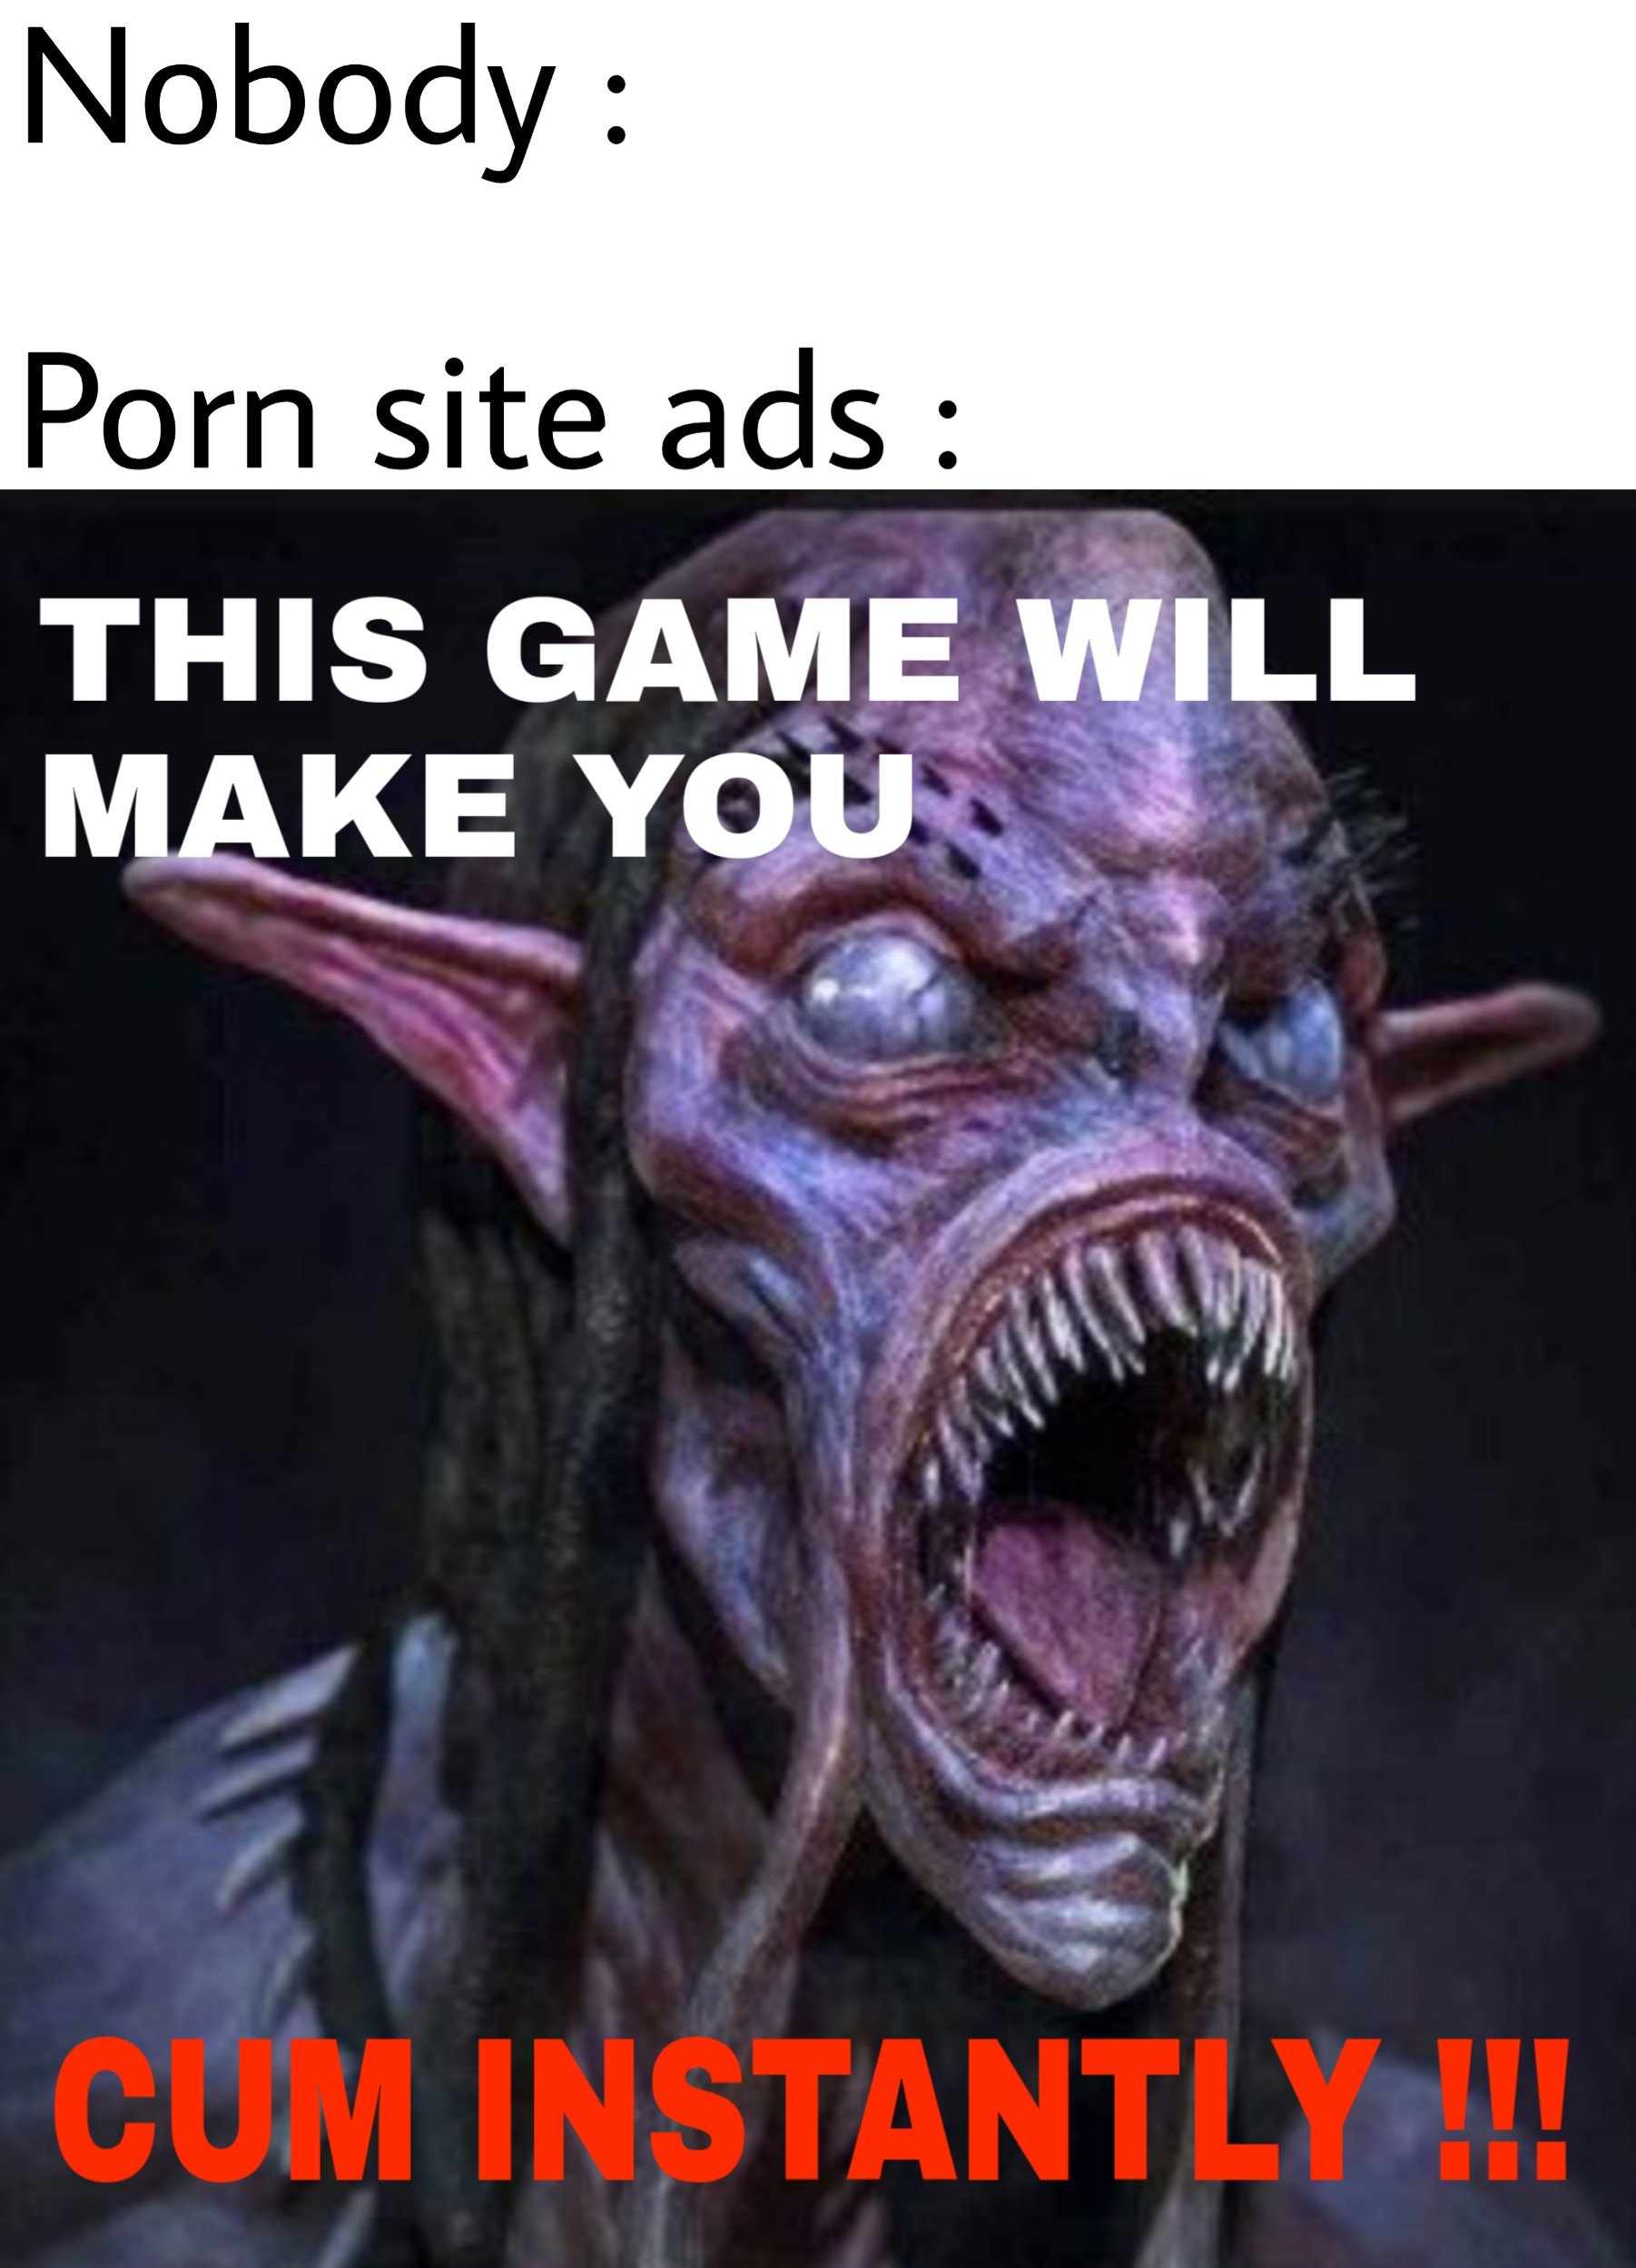 other dimensional creatures - Nobody Porn site ads This Game Will Make You Cum Instantly !!!